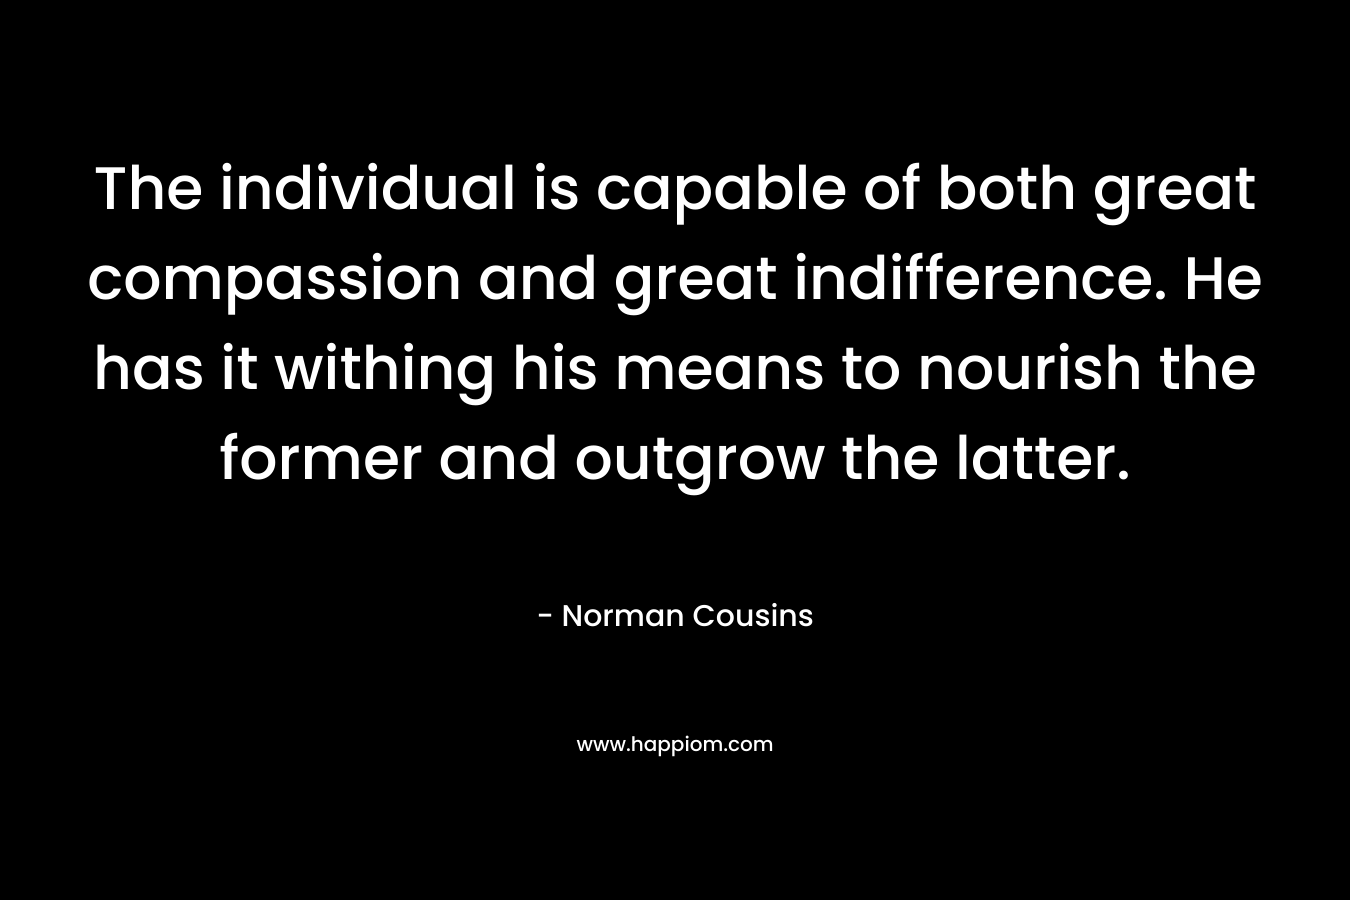 The individual is capable of both great compassion and great indifference. He has it withing his means to nourish the former and outgrow the latter.